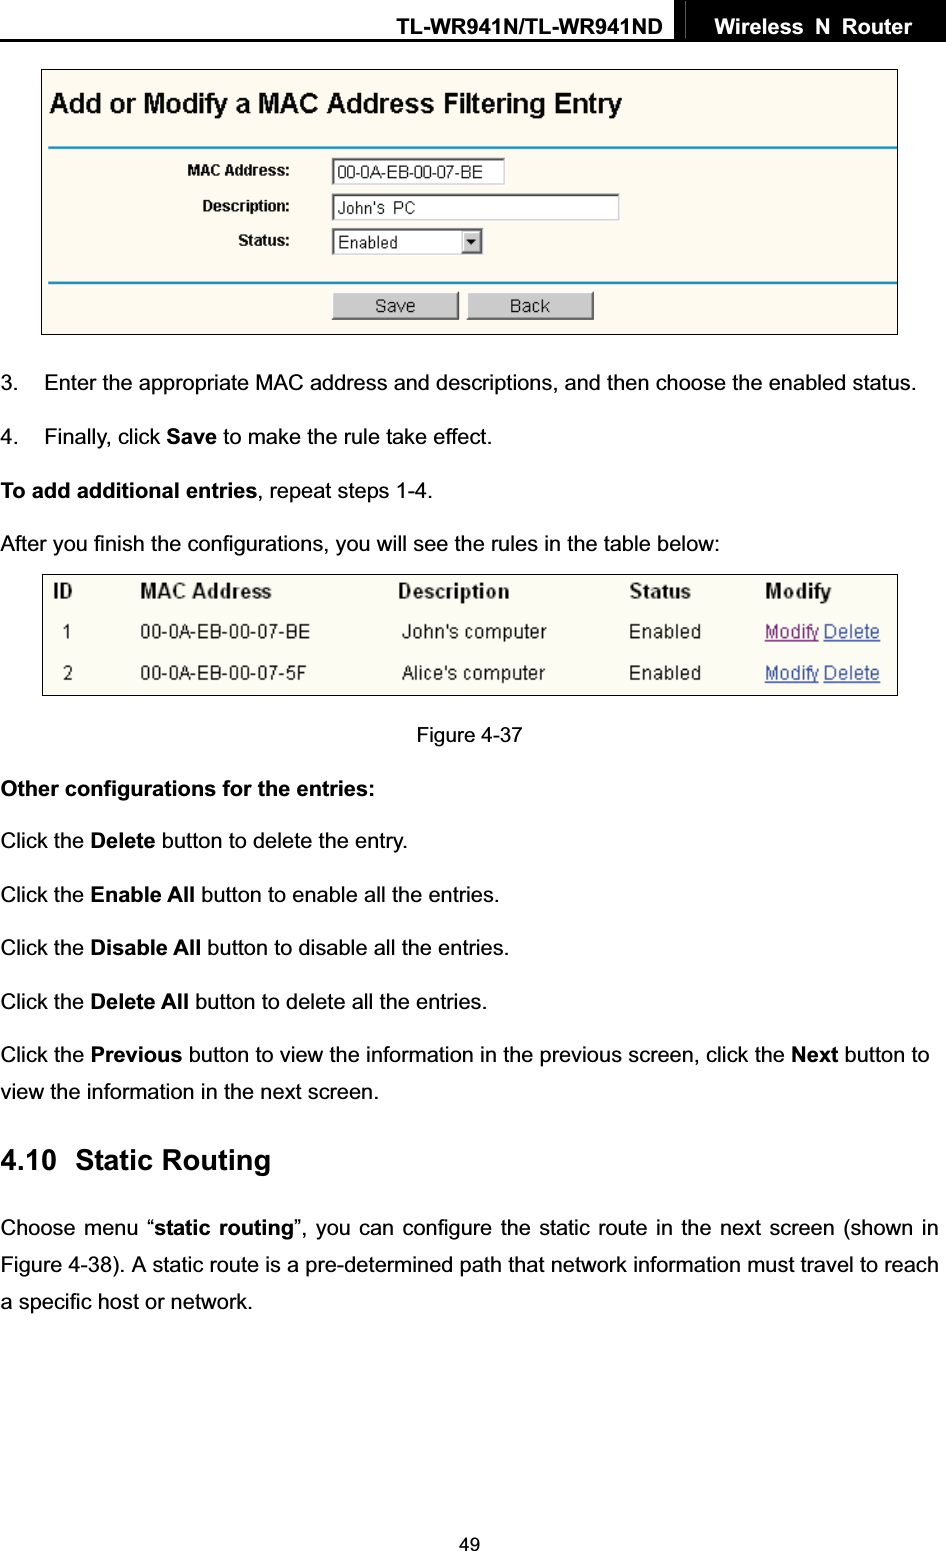 TL-WR941N/TL-WR941ND  Wireless N Router  493.  Enter the appropriate MAC address and descriptions, and then choose the enabled status. 4. Finally, click Save to make the rule take effect. To add additional entries, repeat steps 1-4. After you finish the configurations, you will see the rules in the table below: Figure 4-37 Other configurations for the entries: Click the Delete button to delete the entry. Click the Enable All button to enable all the entries. Click the Disable All button to disable all the entries. Click the Delete All button to delete all the entries. Click the Previous button to view the information in the previous screen, click the Next button to view the information in the next screen. 4.10 Static Routing Choose menu “static routing”, you can configure the static route in the next screen (shown in Figure 4-38). A static route is a pre-determined path that network information must travel to reach a specific host or network. 